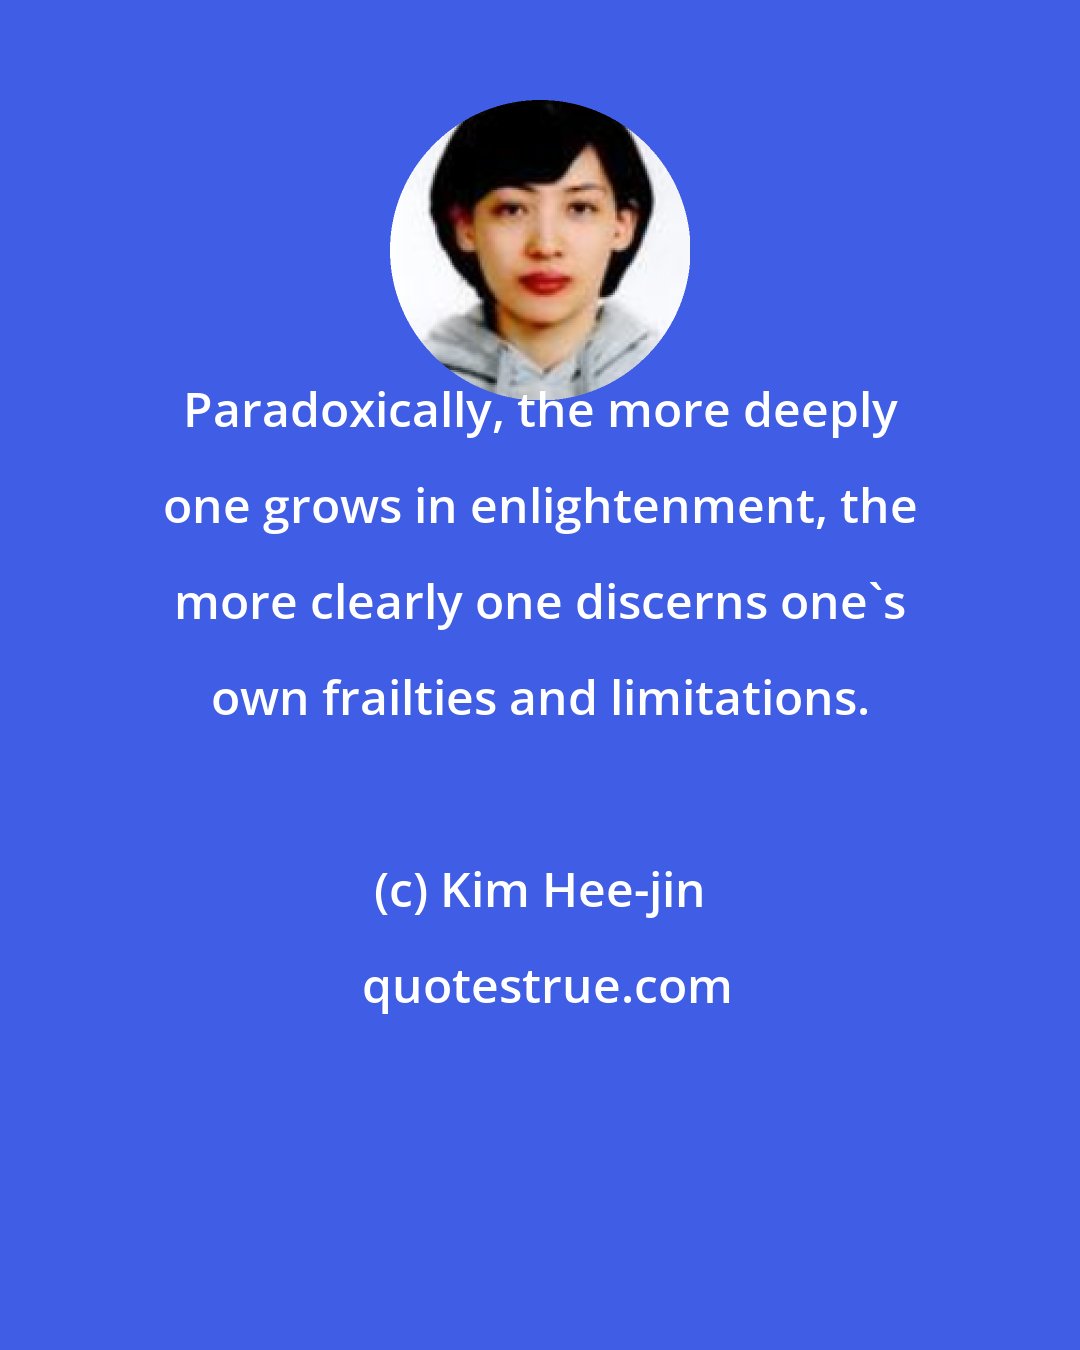 Kim Hee-jin: Paradoxically, the more deeply one grows in enlightenment, the more clearly one discerns one's own frailties and limitations.